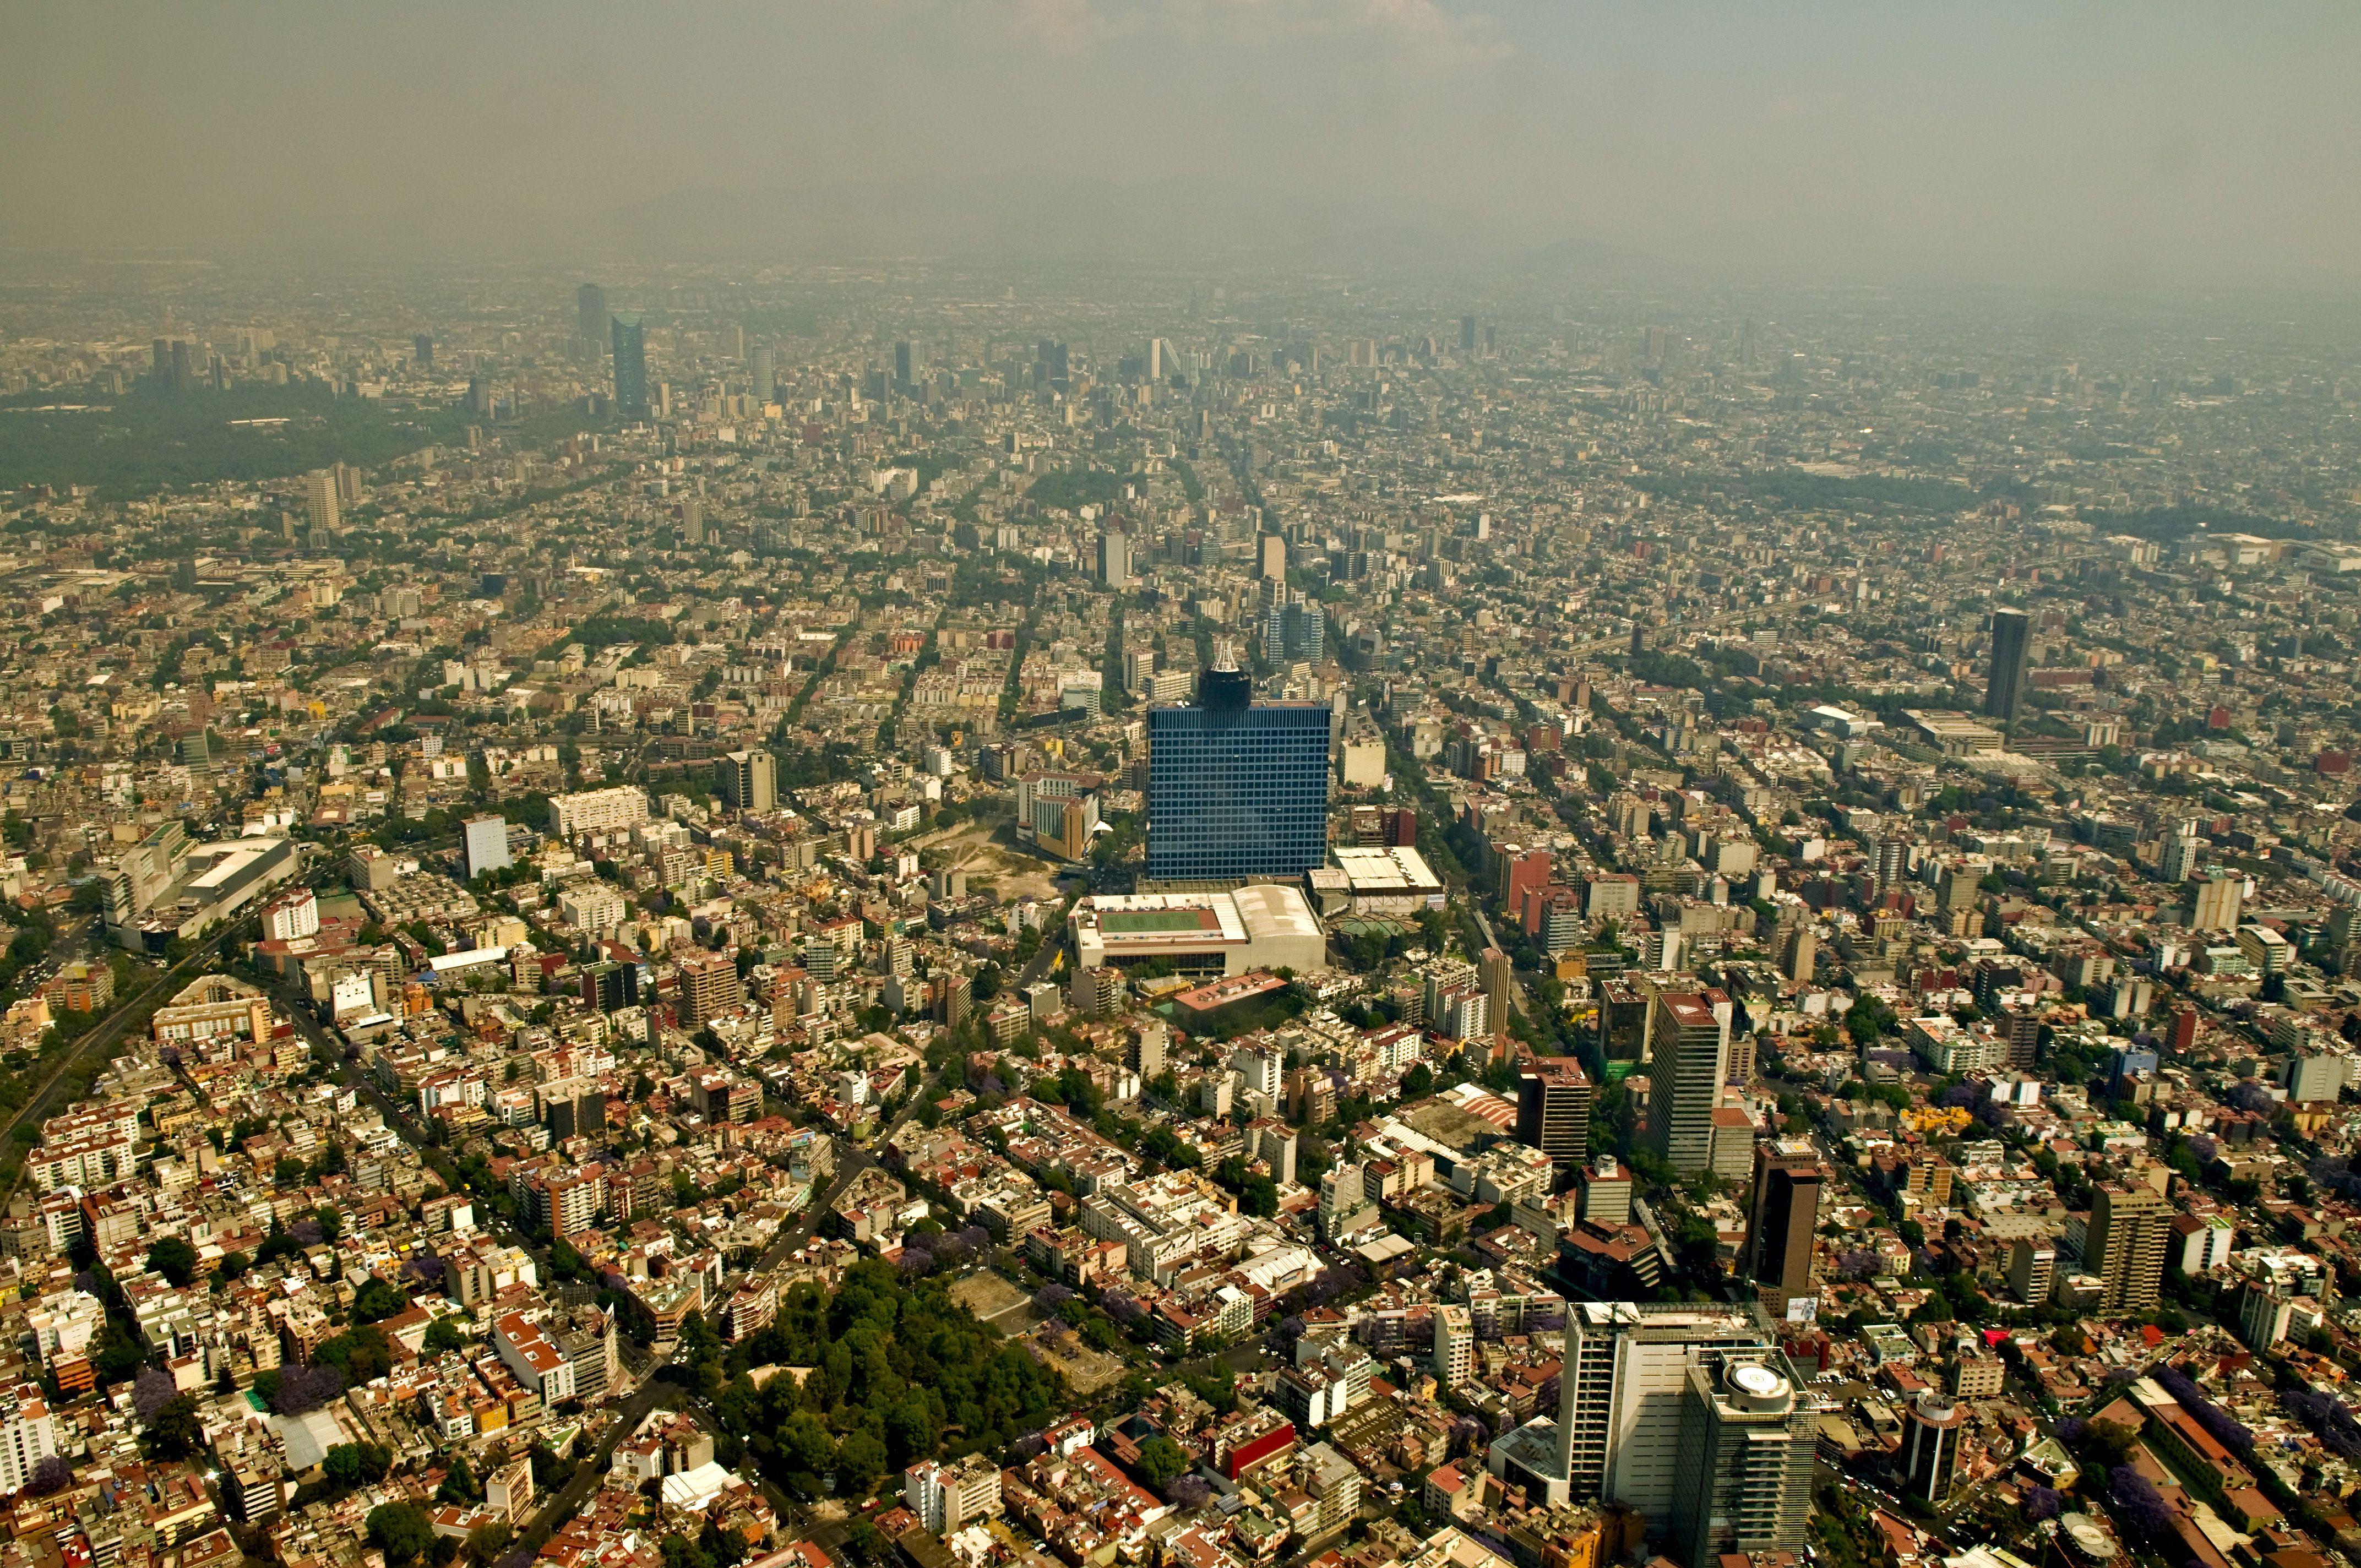 Quality Mexico City Wallpaper, Cities